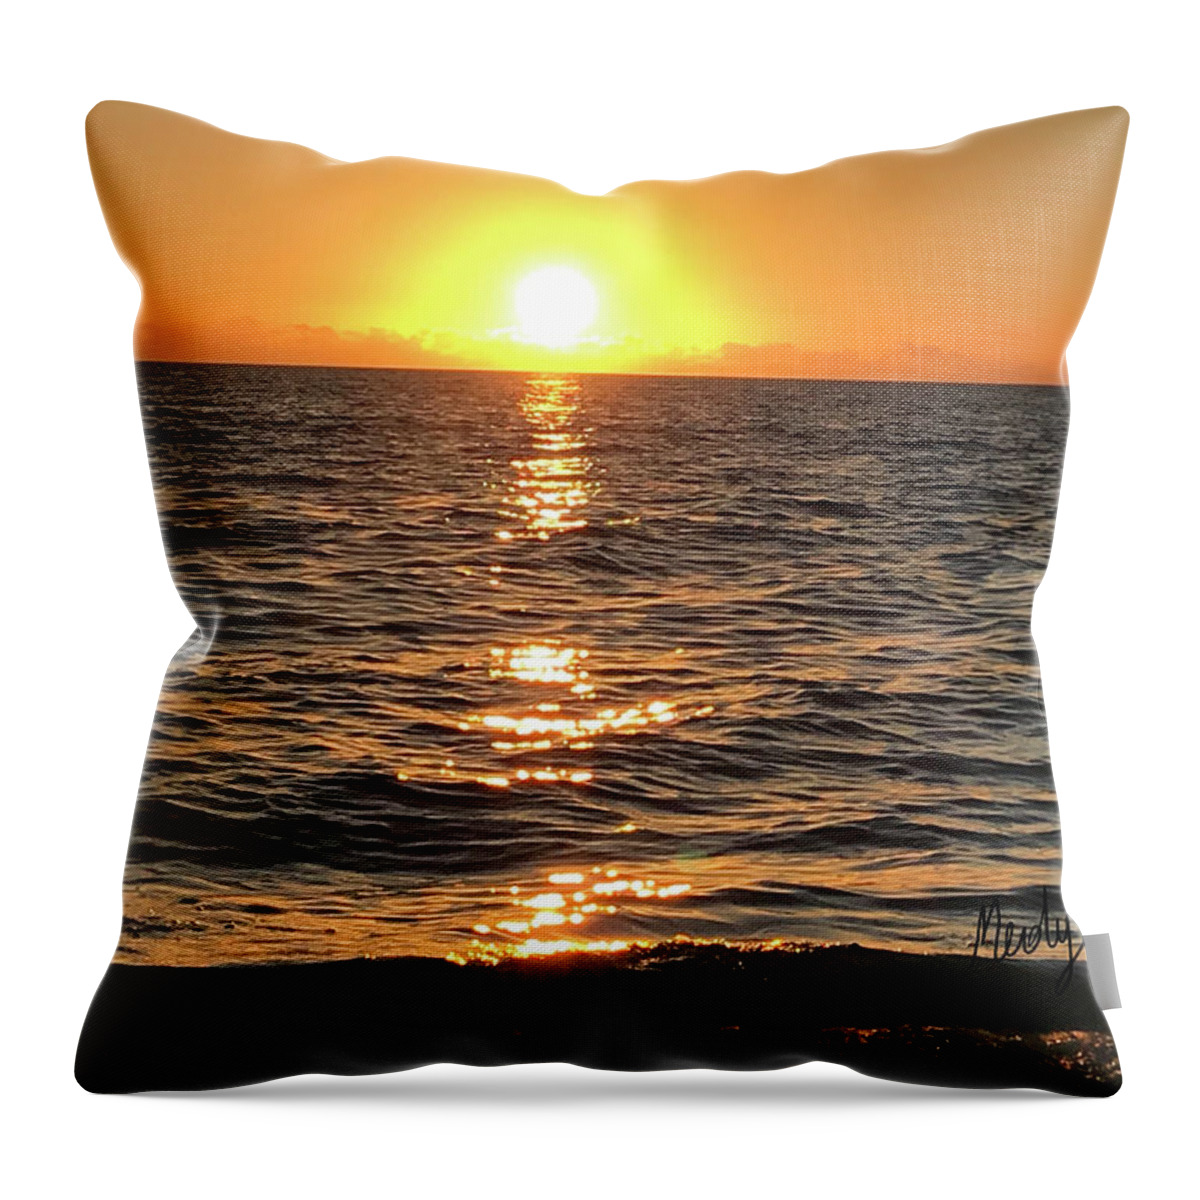 Sunset Throw Pillow featuring the photograph Higher Power in Hawaii by Medge Jaspan